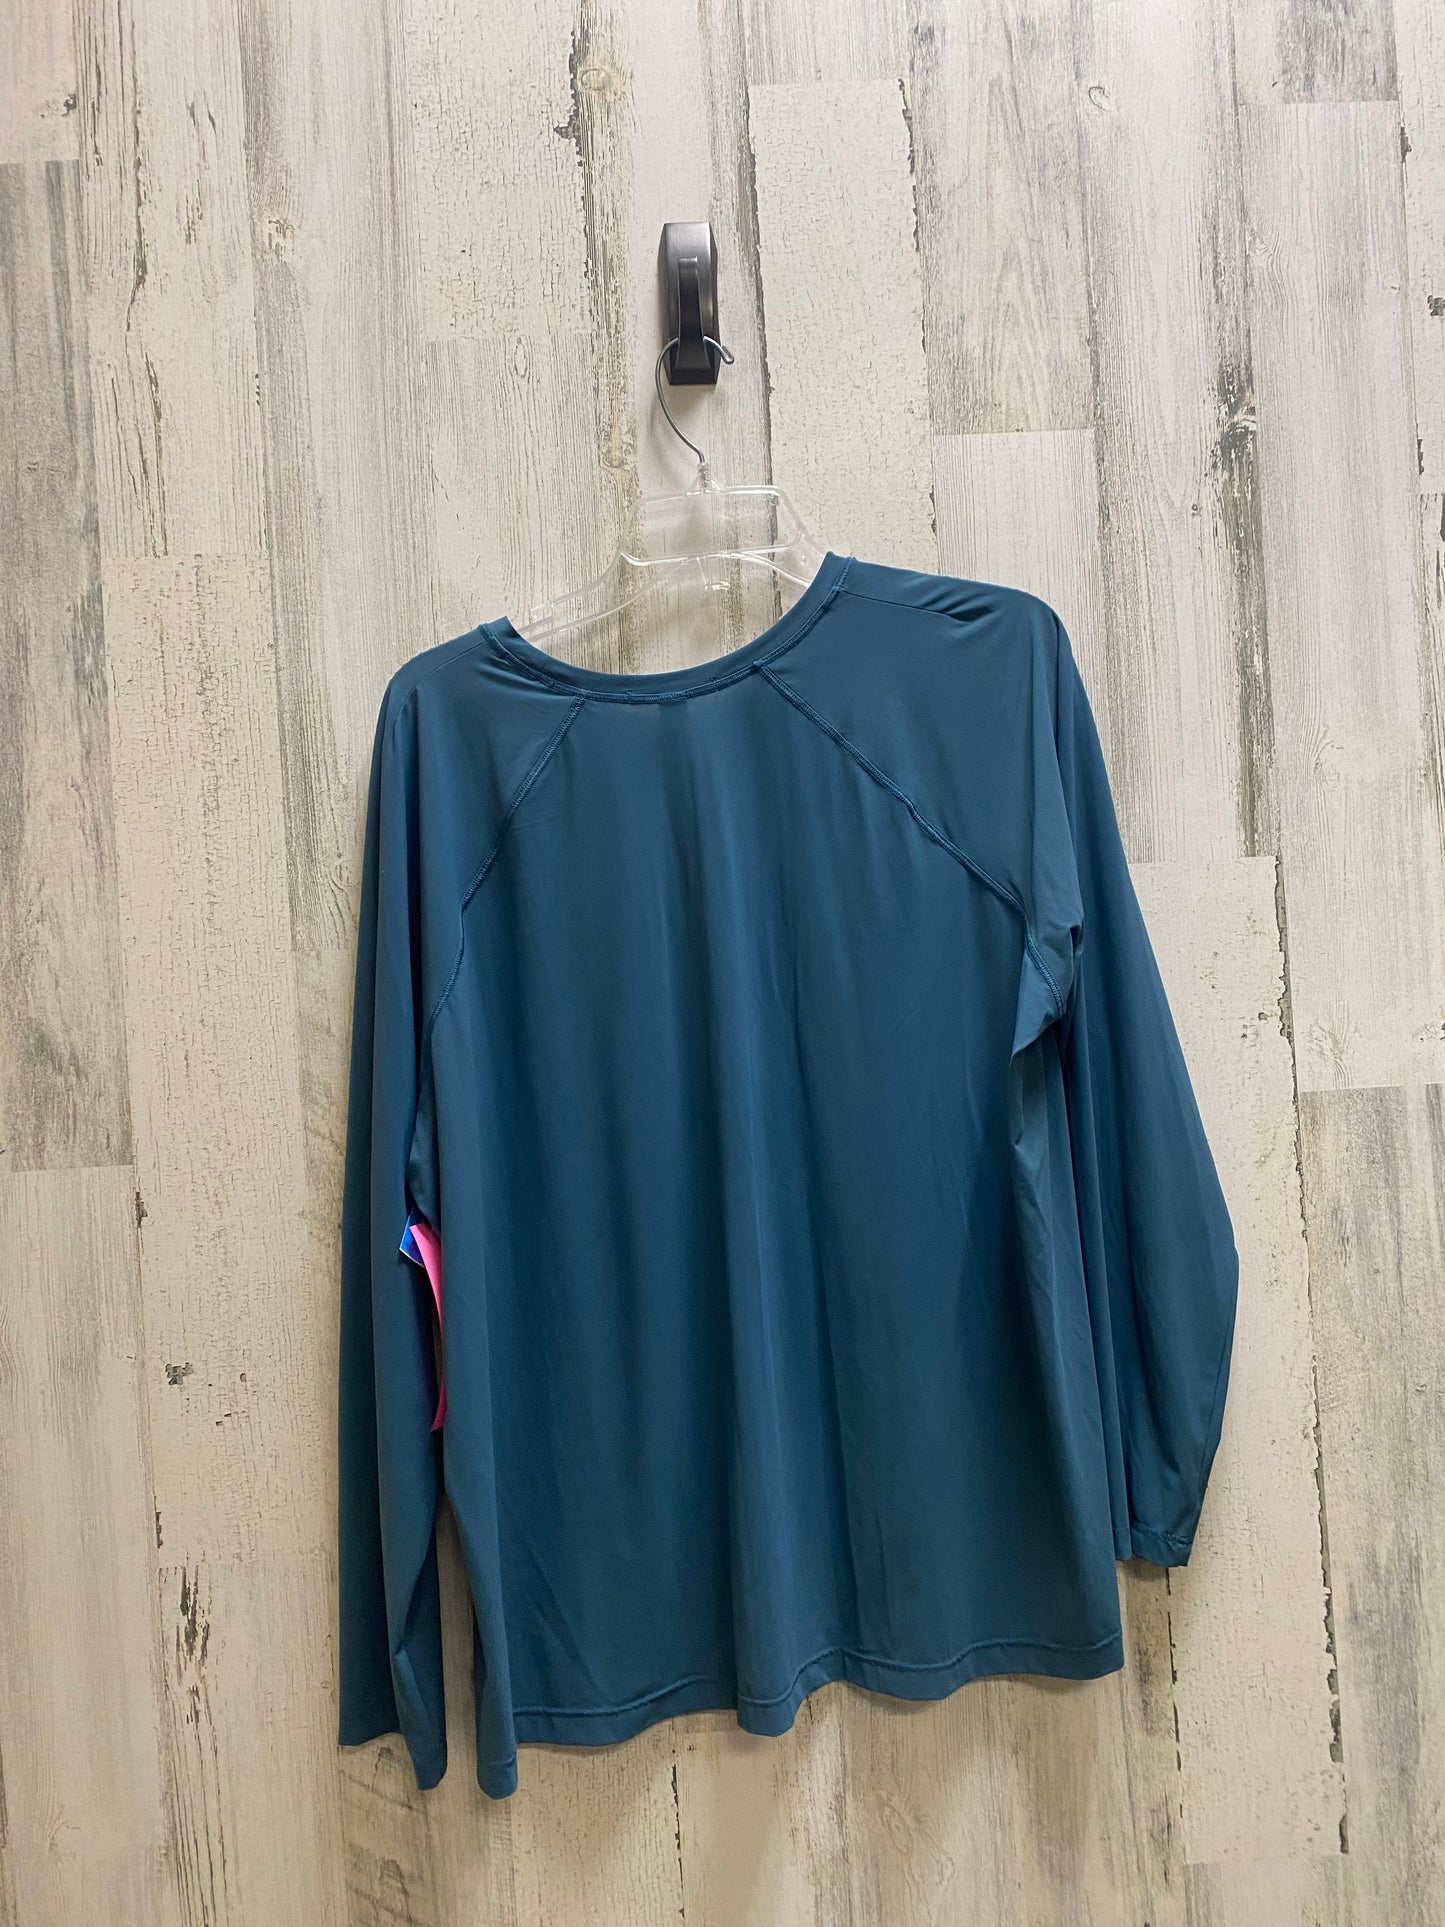 Athletic Top Long Sleeve Collar By Athleta  Size: 2x